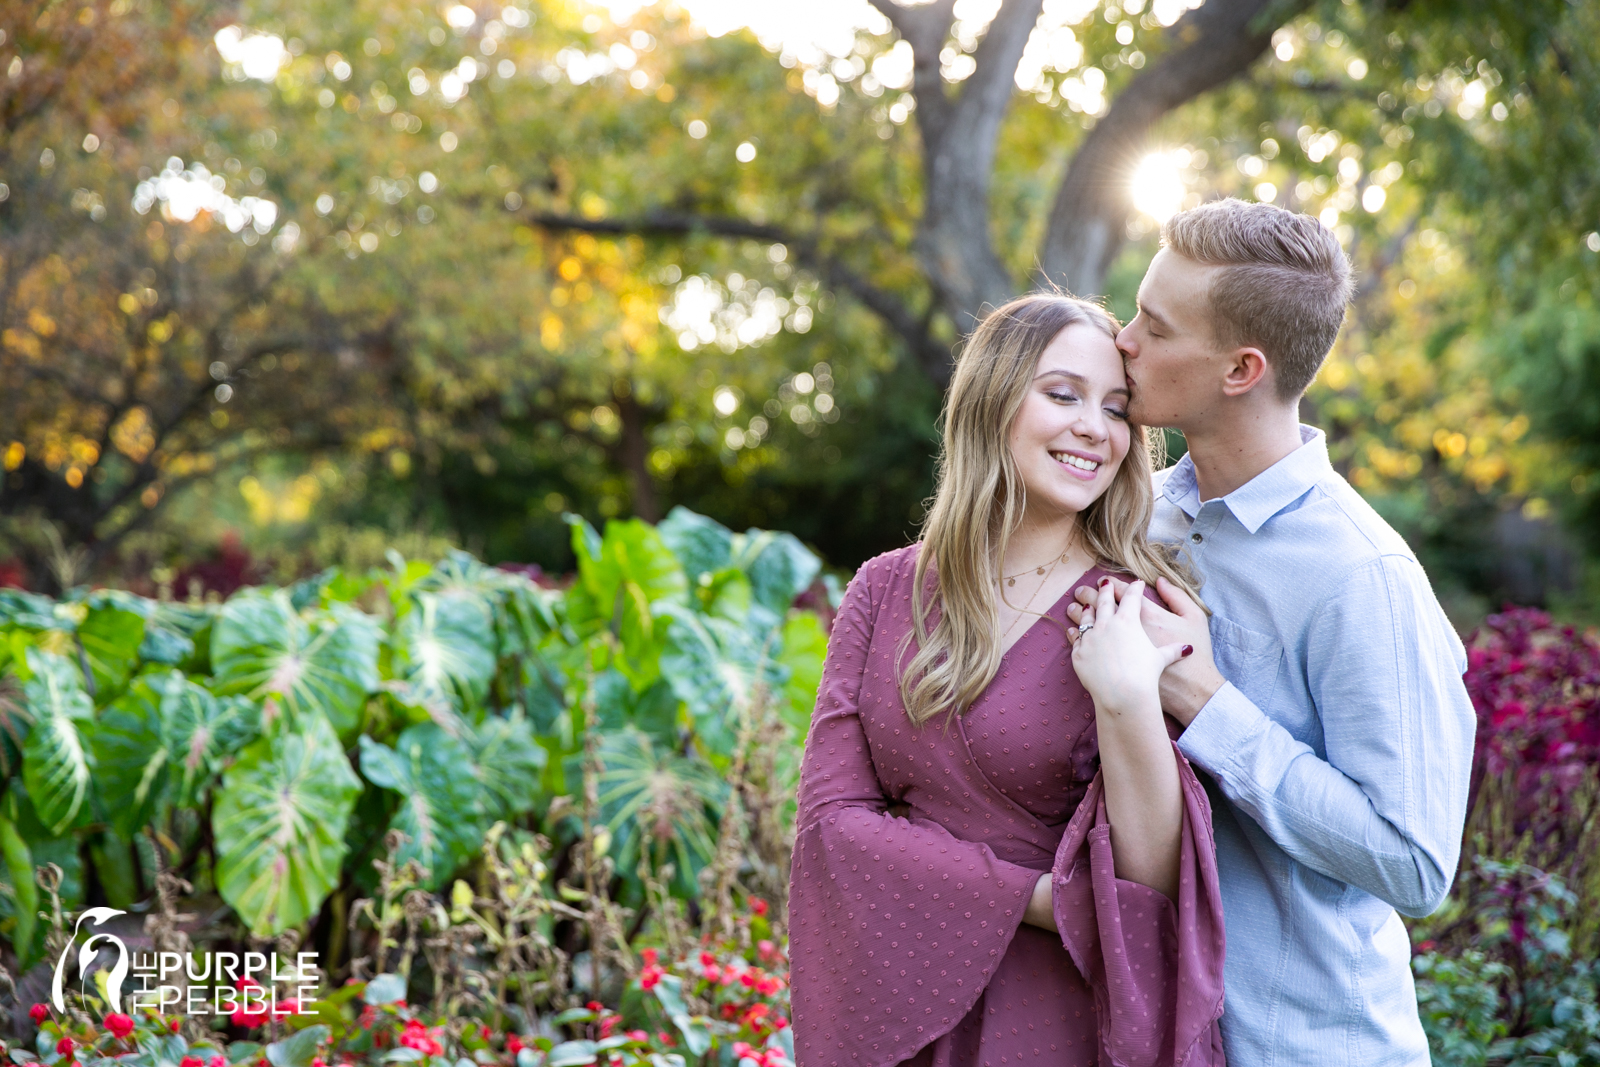 Outdoor Engagement Session Inspiration